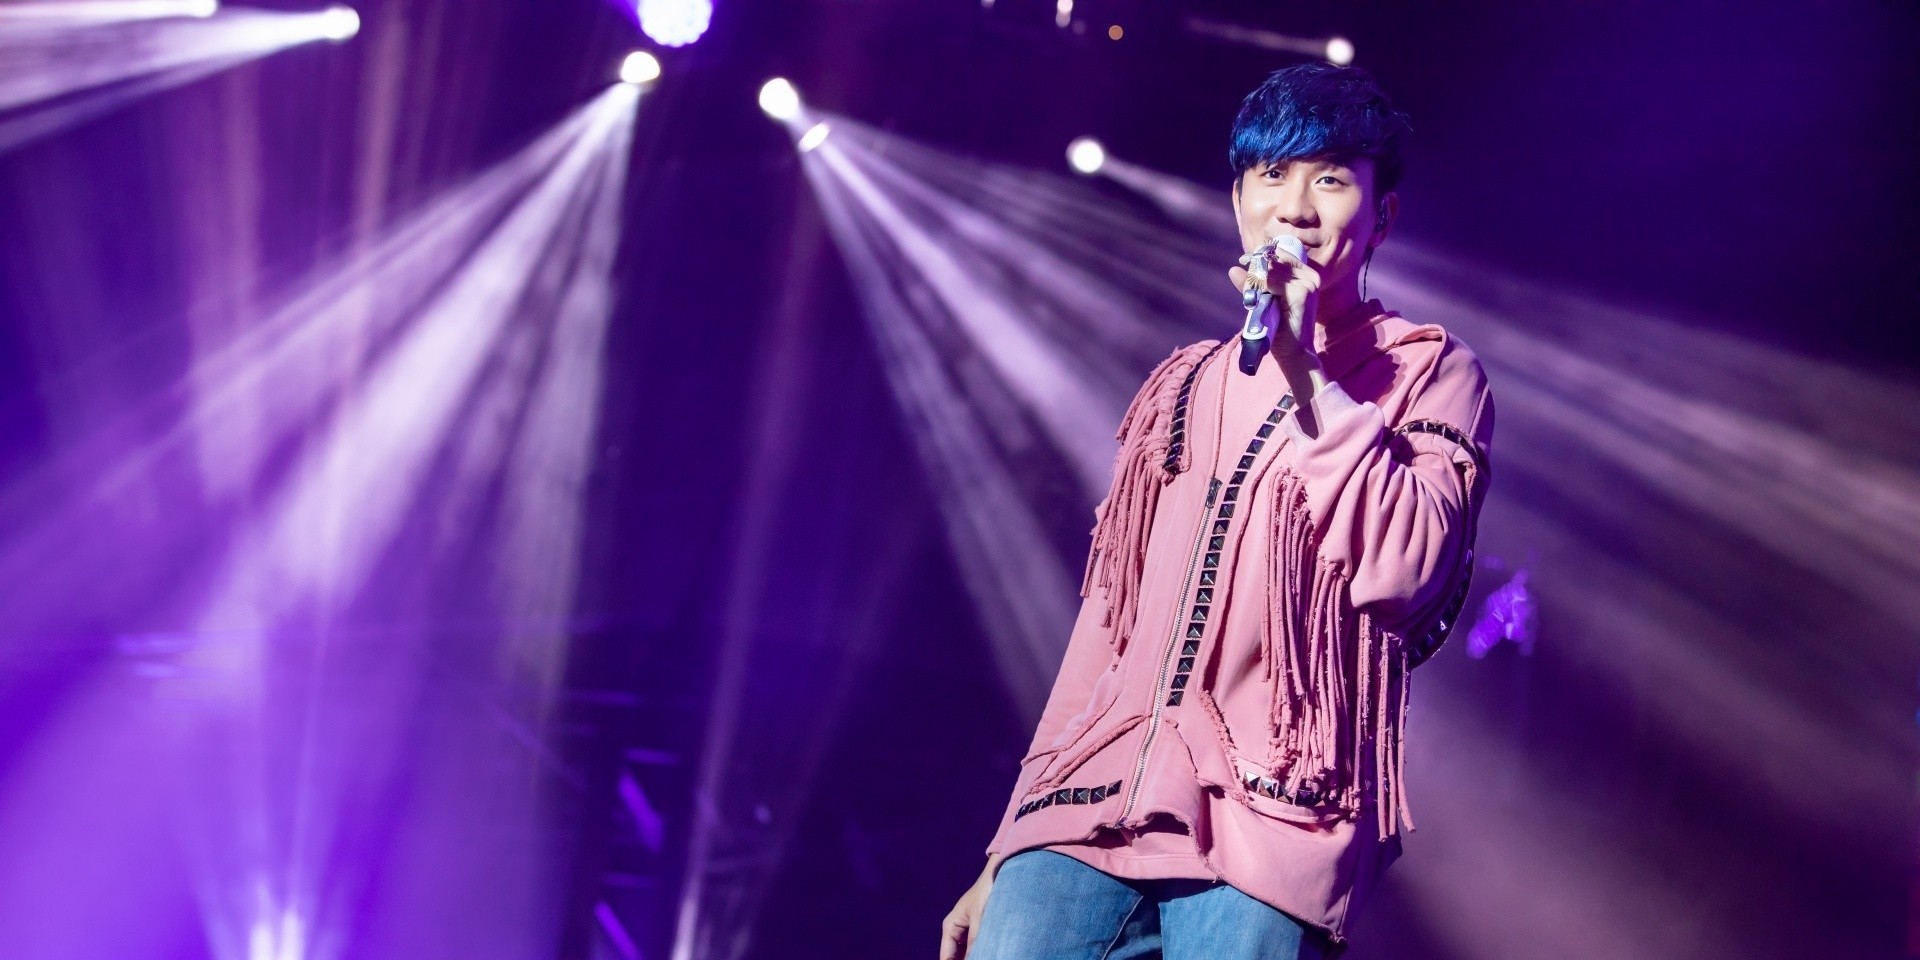 JJ Lin delivers an performance at his Sanctuary World